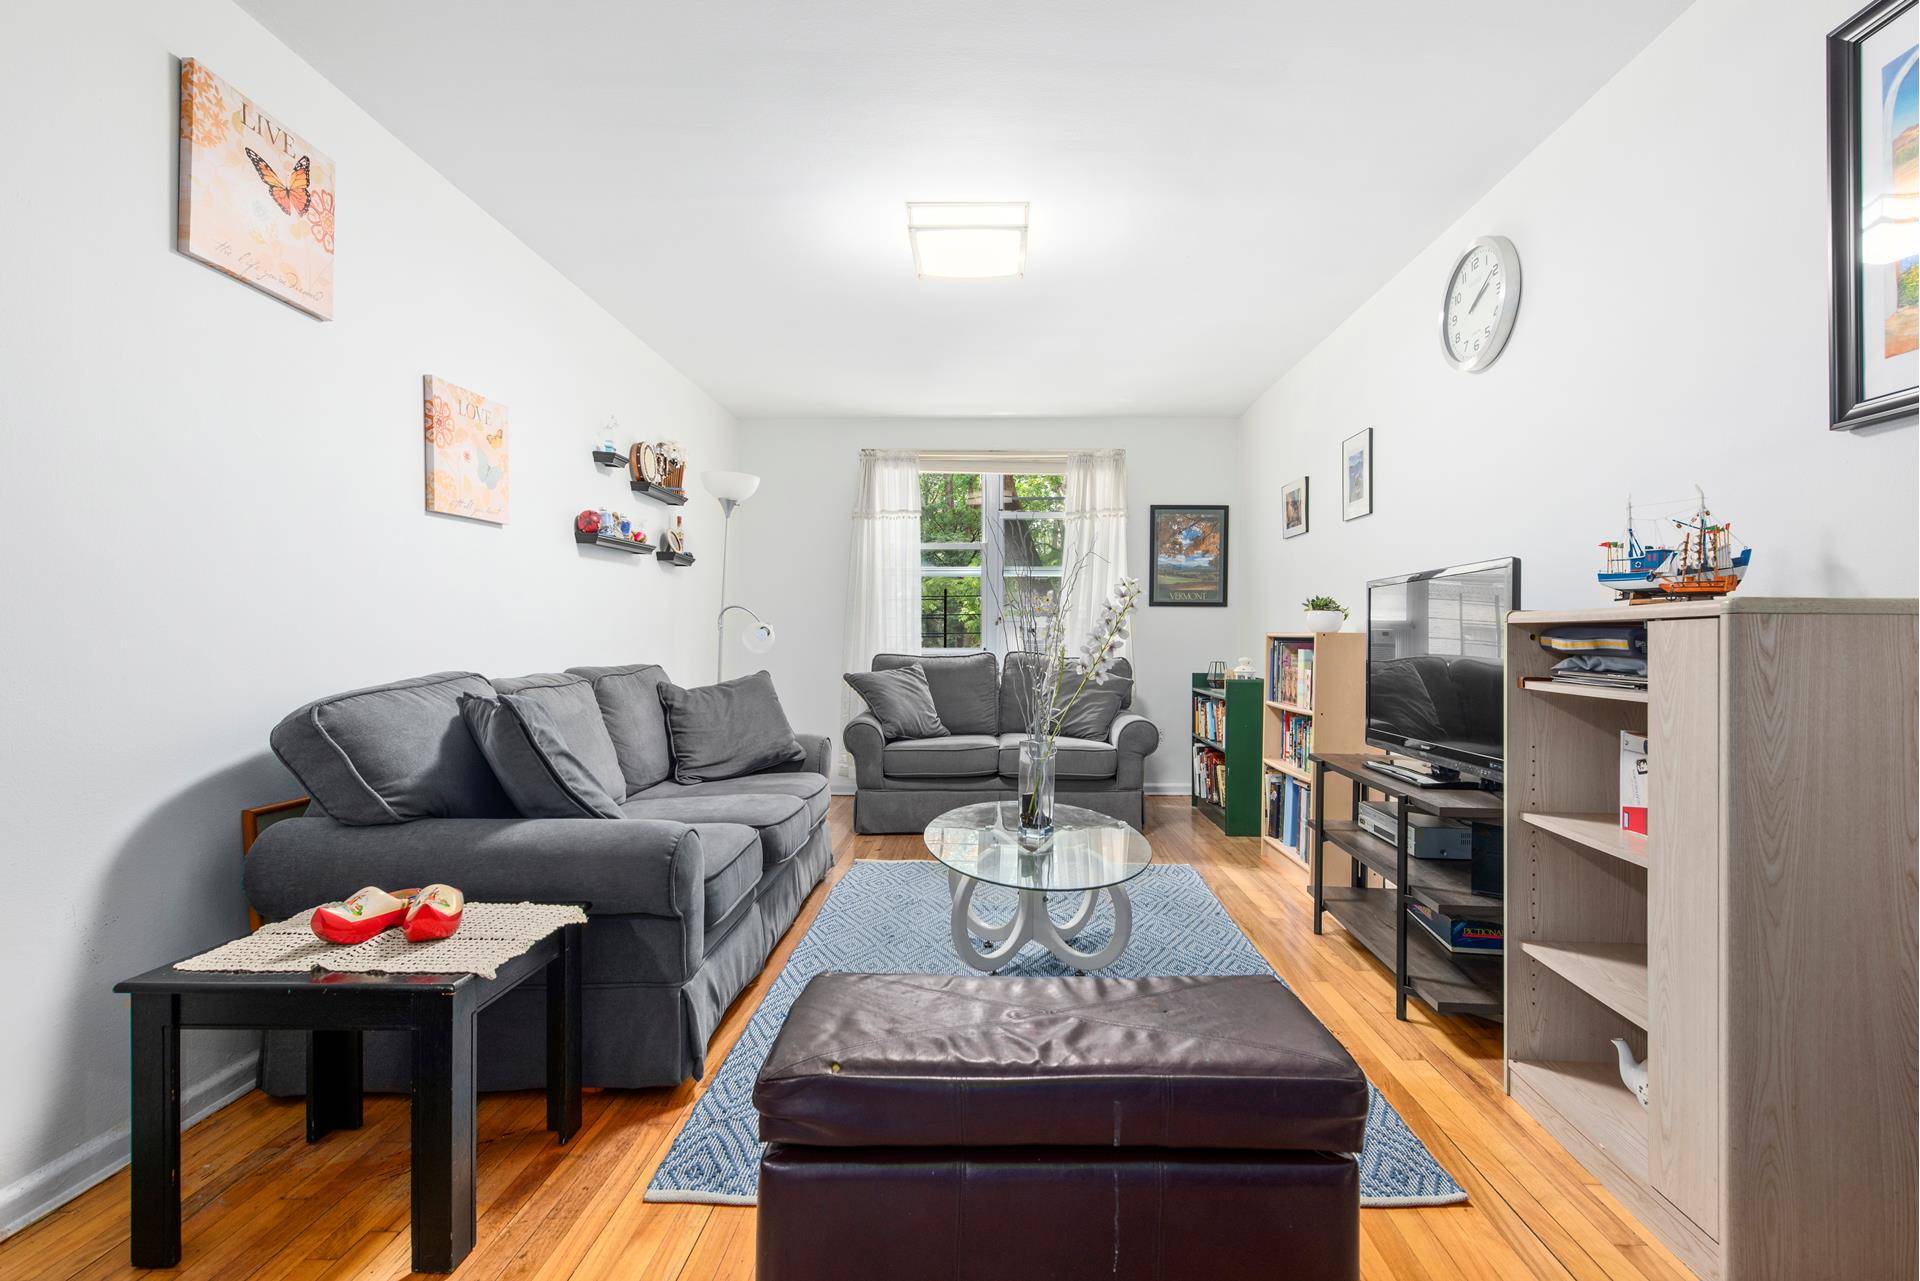 Welcome to this beautiful 2 BR 1 BA unit in the heart of historic Jackson Heights.